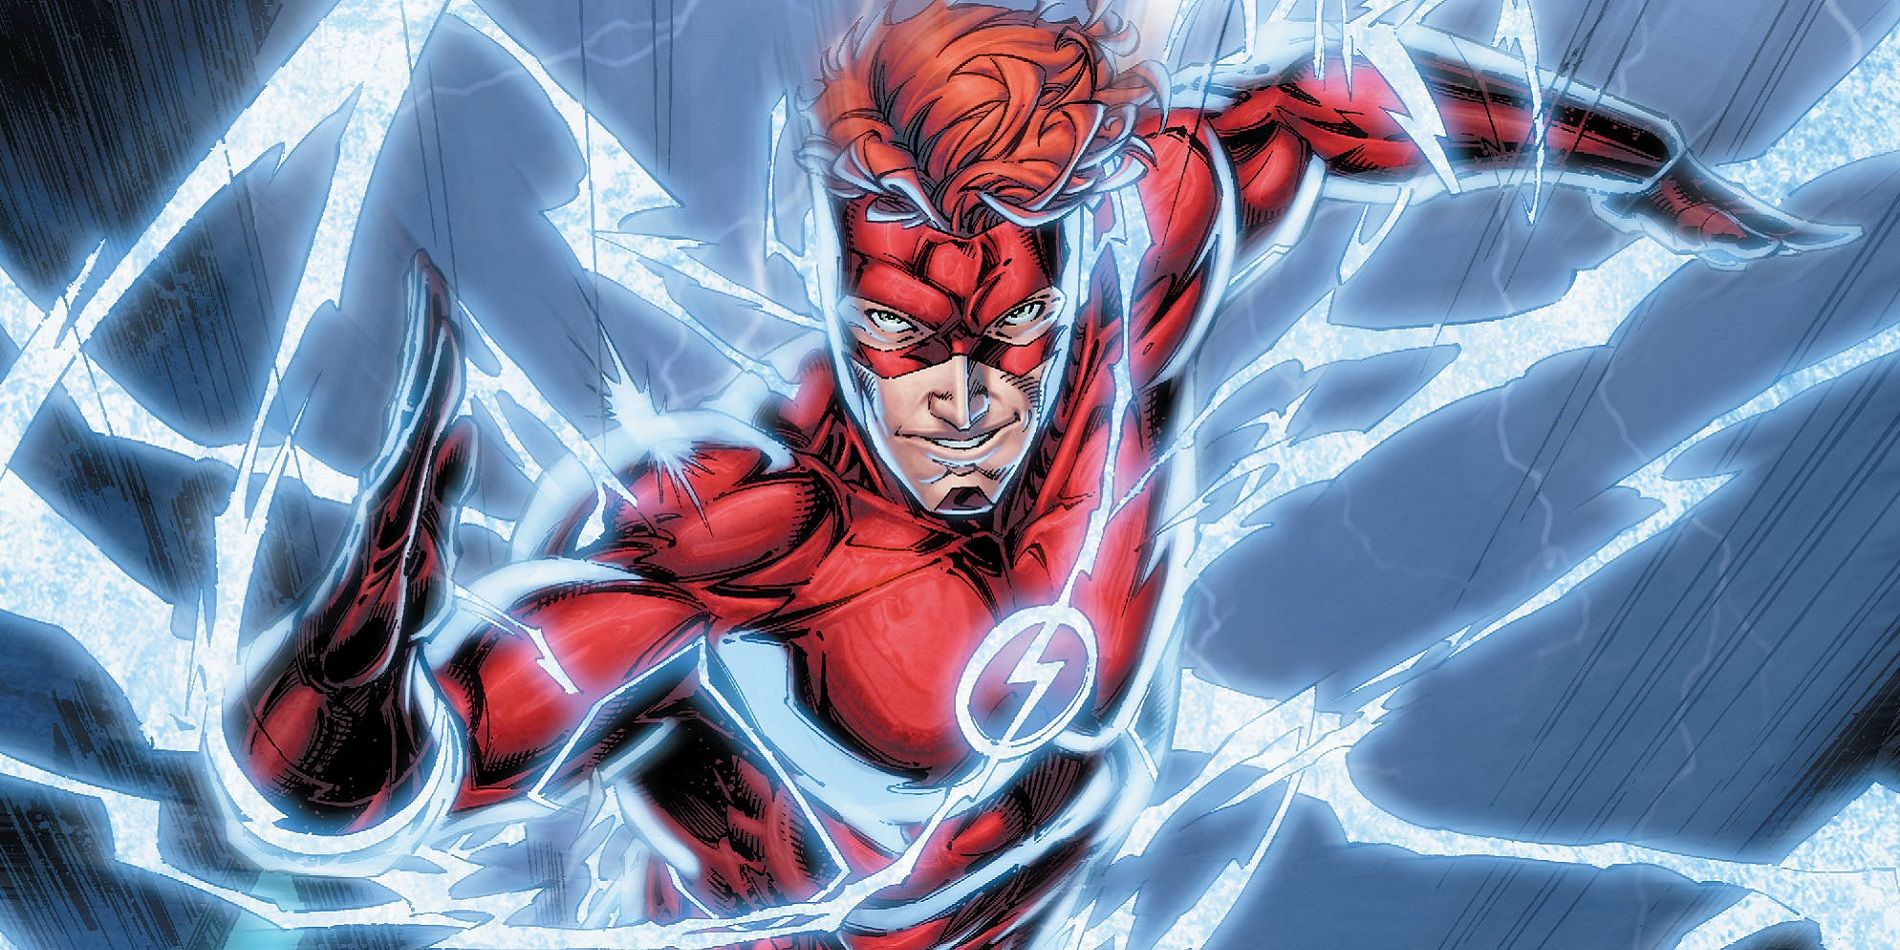 Wally West Deserves To Be DC’s Main Flash